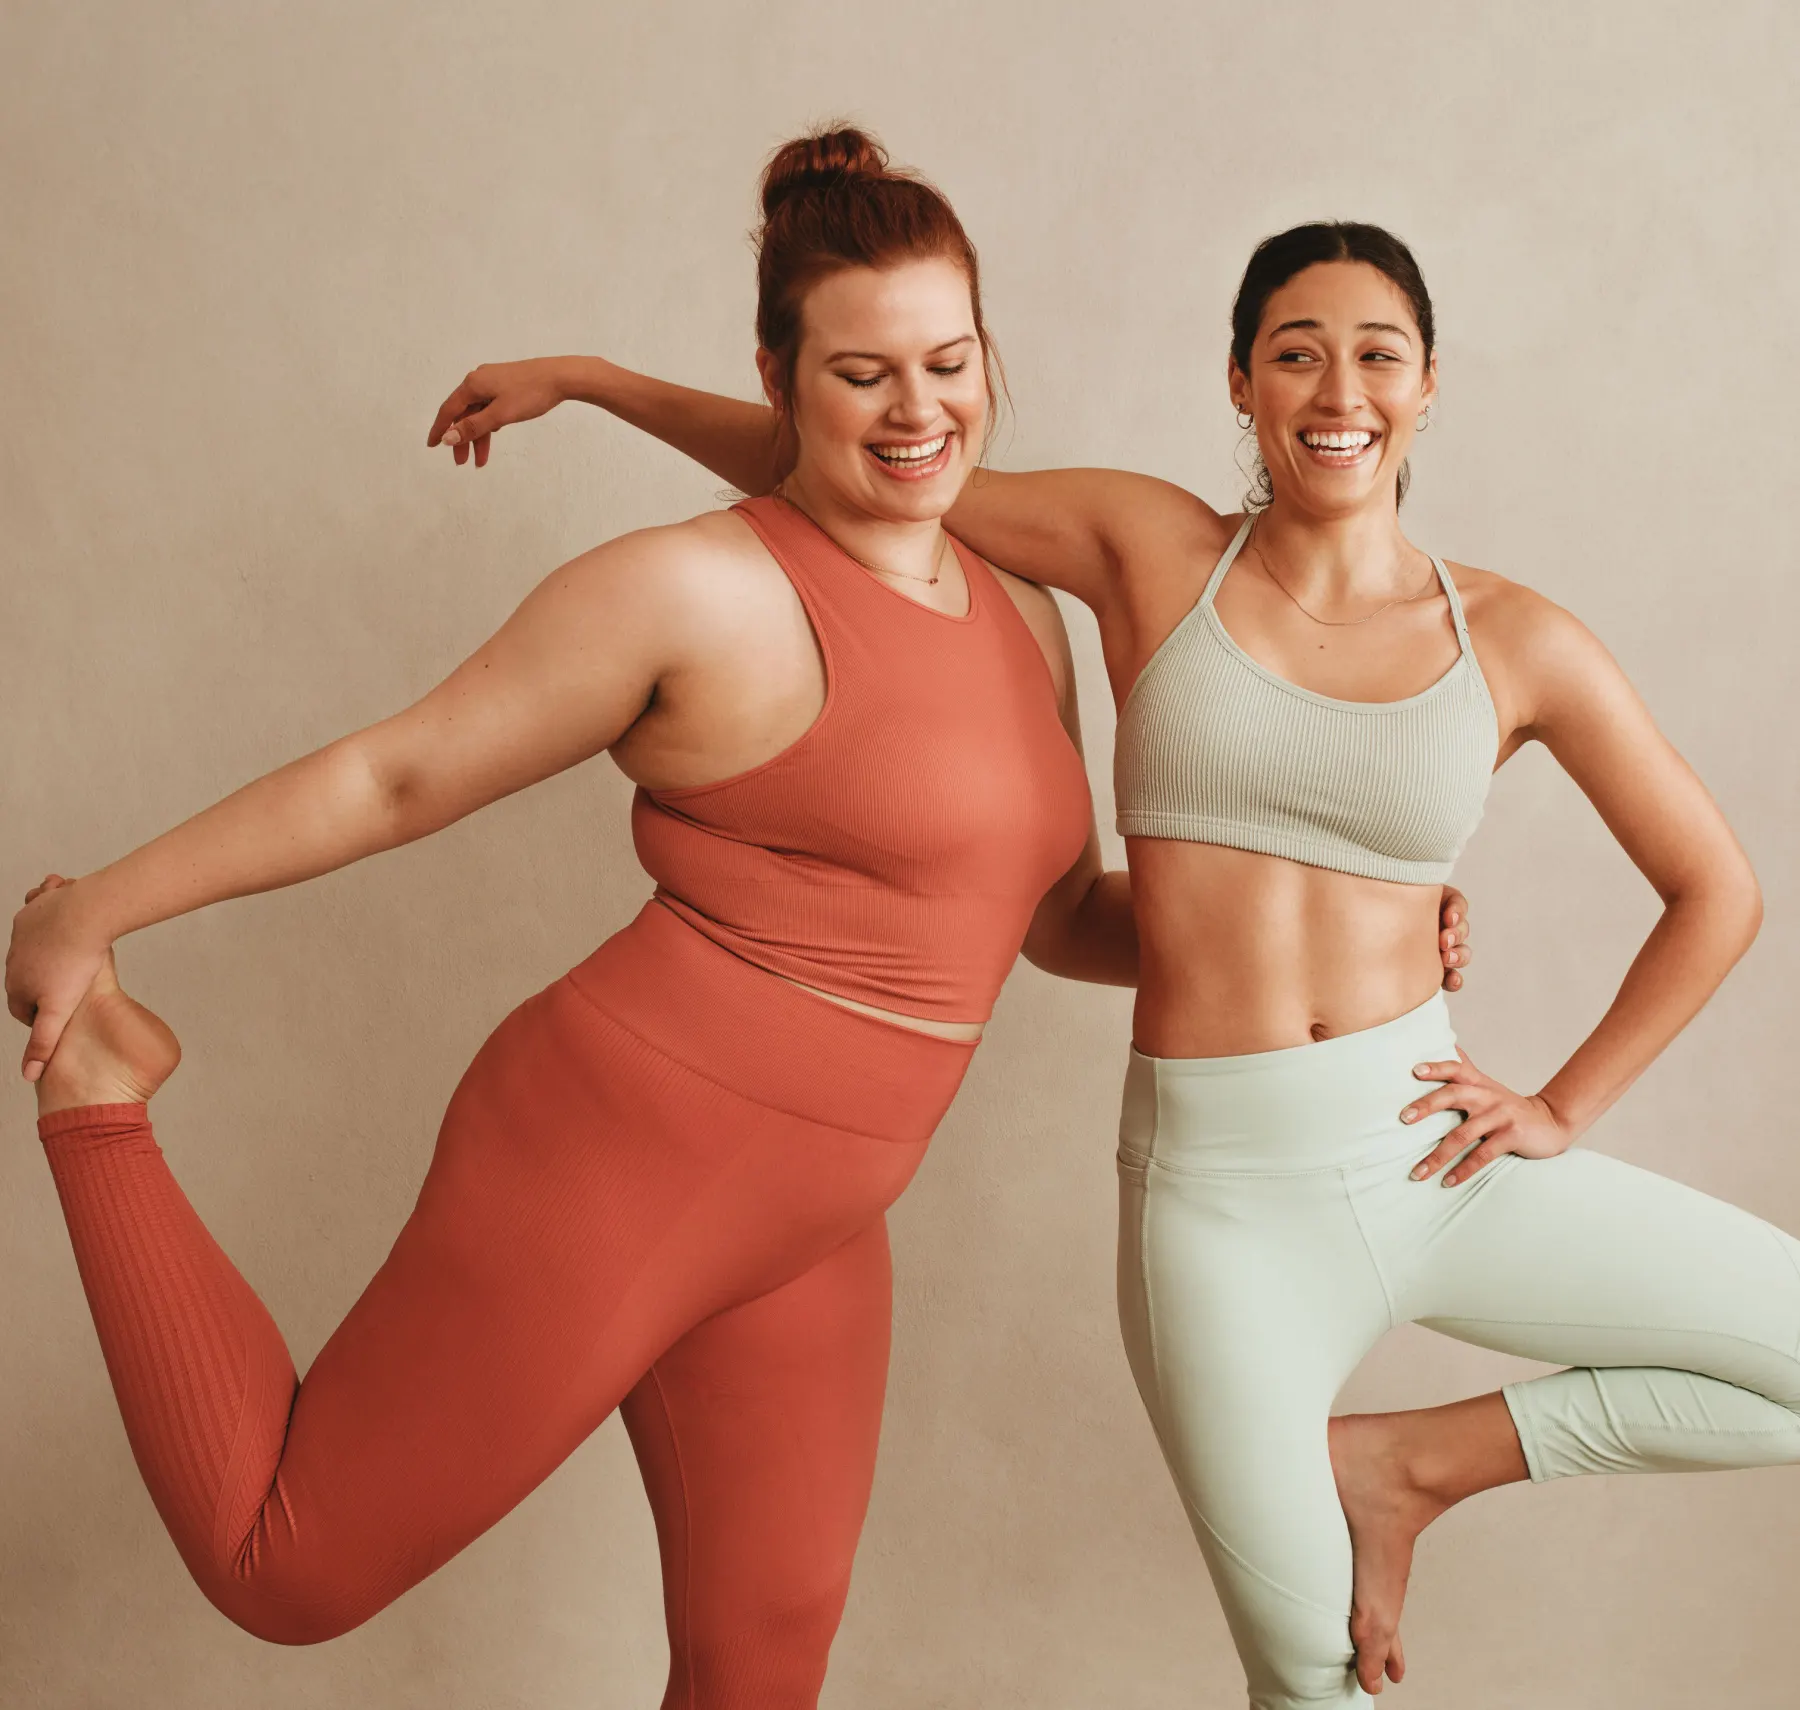 two healthy women exercising together